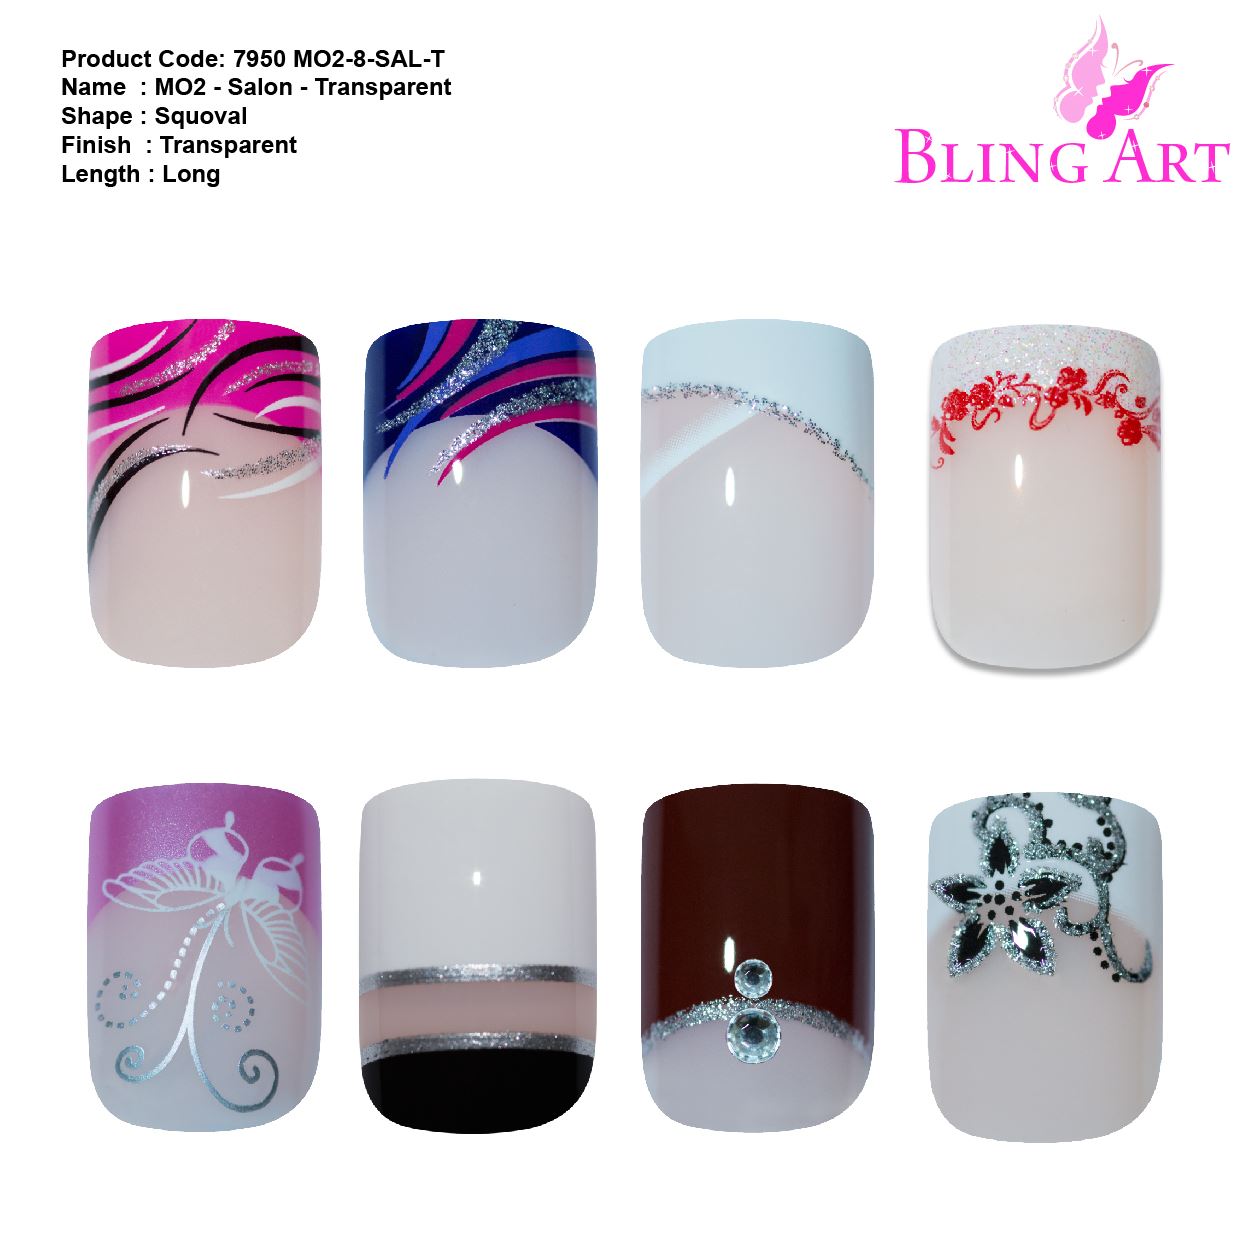 False Nails by Bling Art 360 Squoval Long Transparent Acrylic Fake Nail Tips without glue